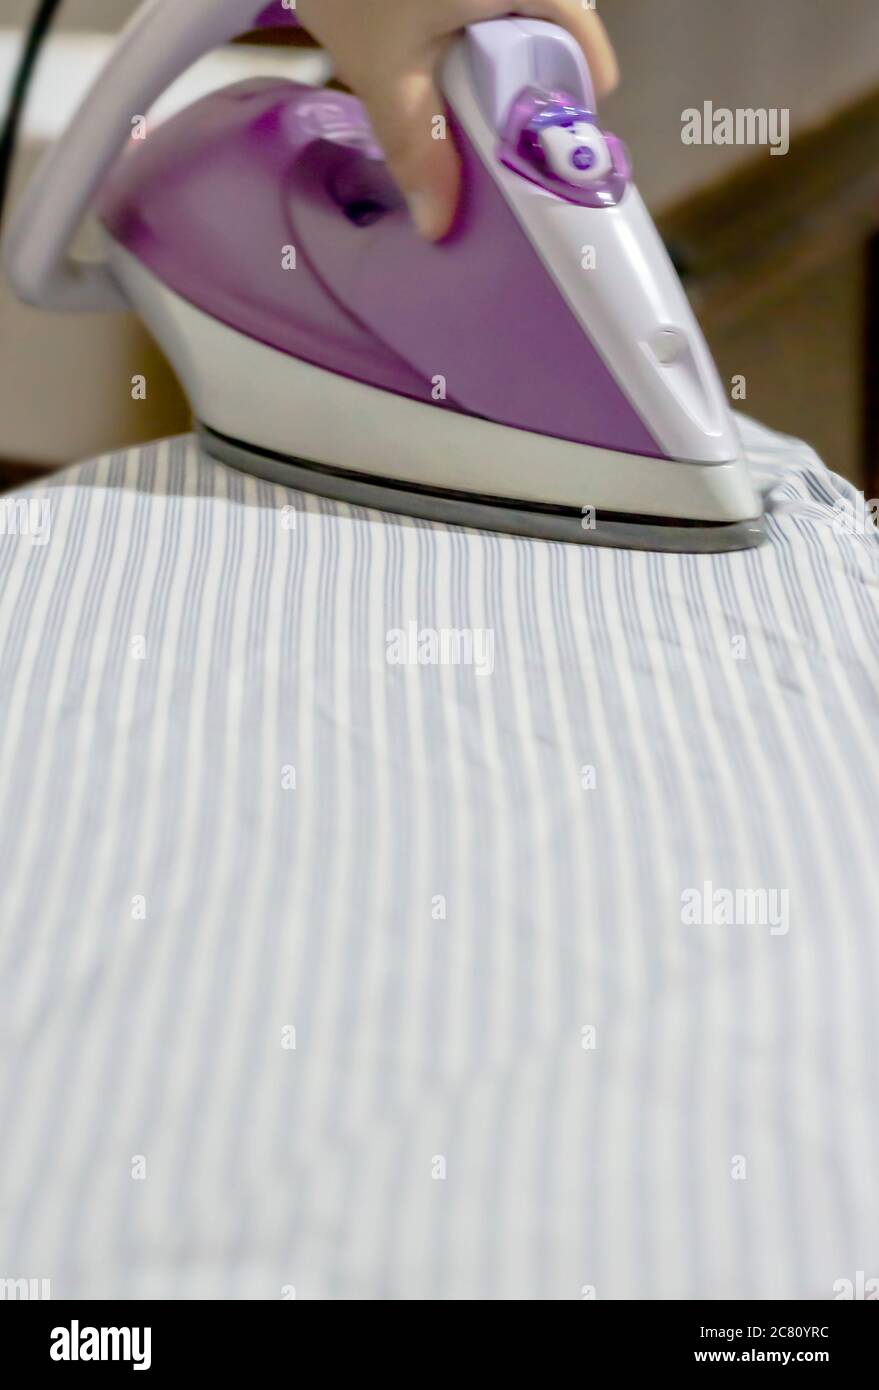 Ironing the clothes. Iron - Appliance, Laundry, Chores, Domestic Life, Wrinkled Stock Photo